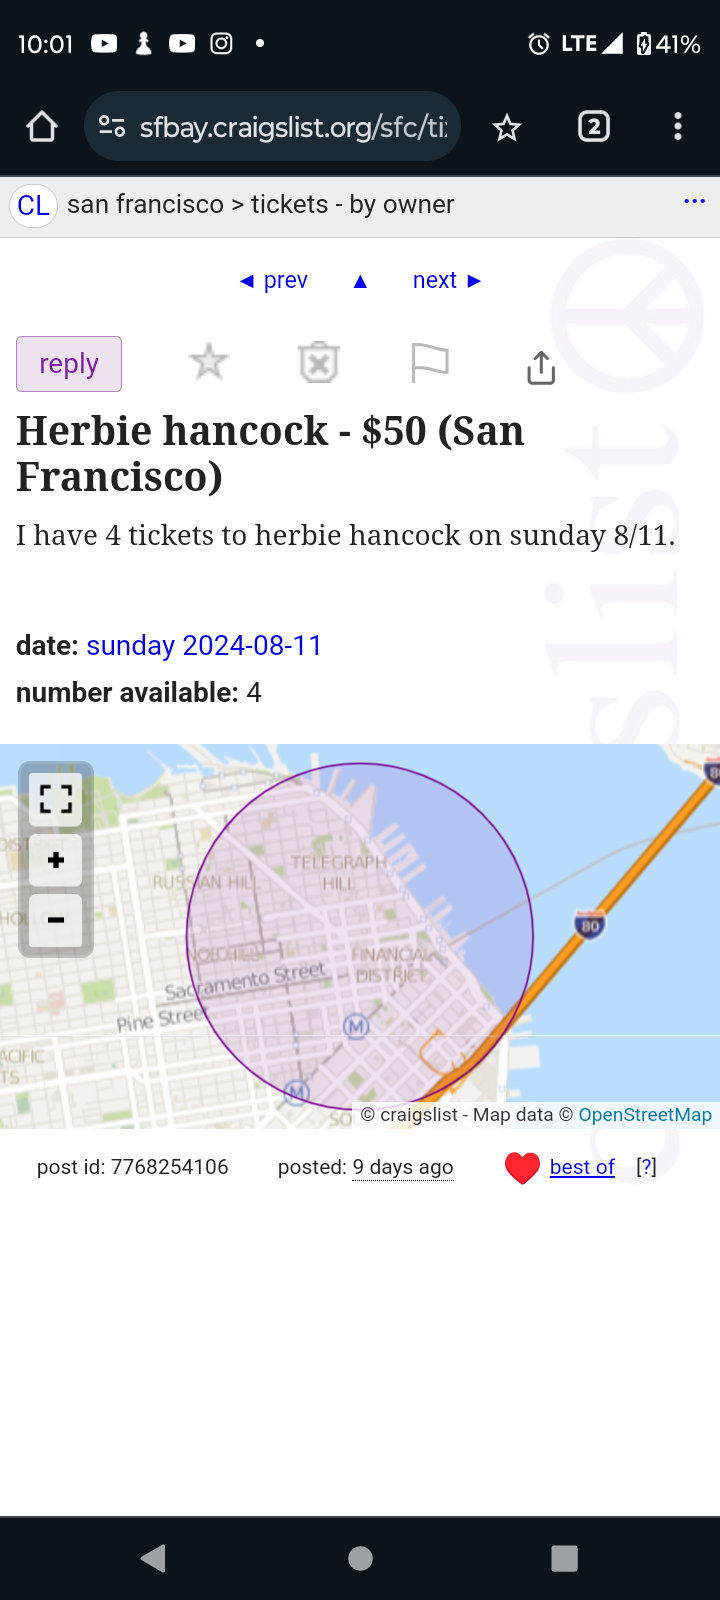 CL ad